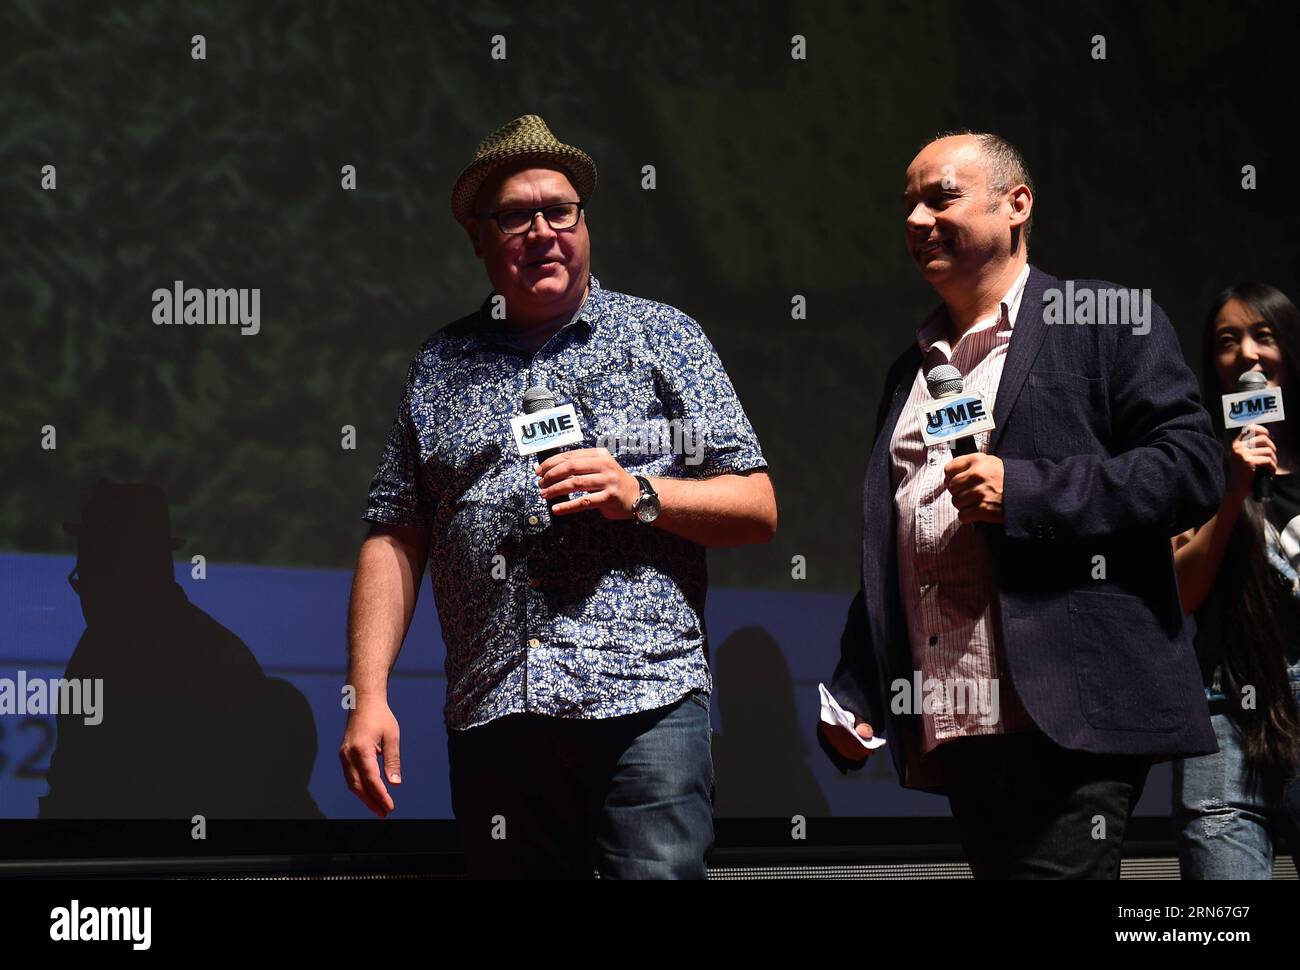 (150714) -- BEIJING, July 14, 2015 -- Richard Starzak (L) and Mark Burton (R), Directors of movie Shaun the Sheep, attends the premiere in Beijing, Capital of China, July 14, 2015. The film is part of the program of Sino-U.K. Year of Cultural Exchange and will be on Chinese screens from July 17. ) (dhf) CHINA-BEIJING-SHAUN THE SHEEP-PREMIERE (CN) JinxLiangkuai PUBLICATIONxNOTxINxCHN   150714 Beijing July 14 2015 Richard Starzak l and Mark Burton r Directors of Movie Shaun The Sheep Attends The Premiere in Beijing Capital of China July 14 2015 The Film IS Part of The Program of SINO U K Year of Stock Photo